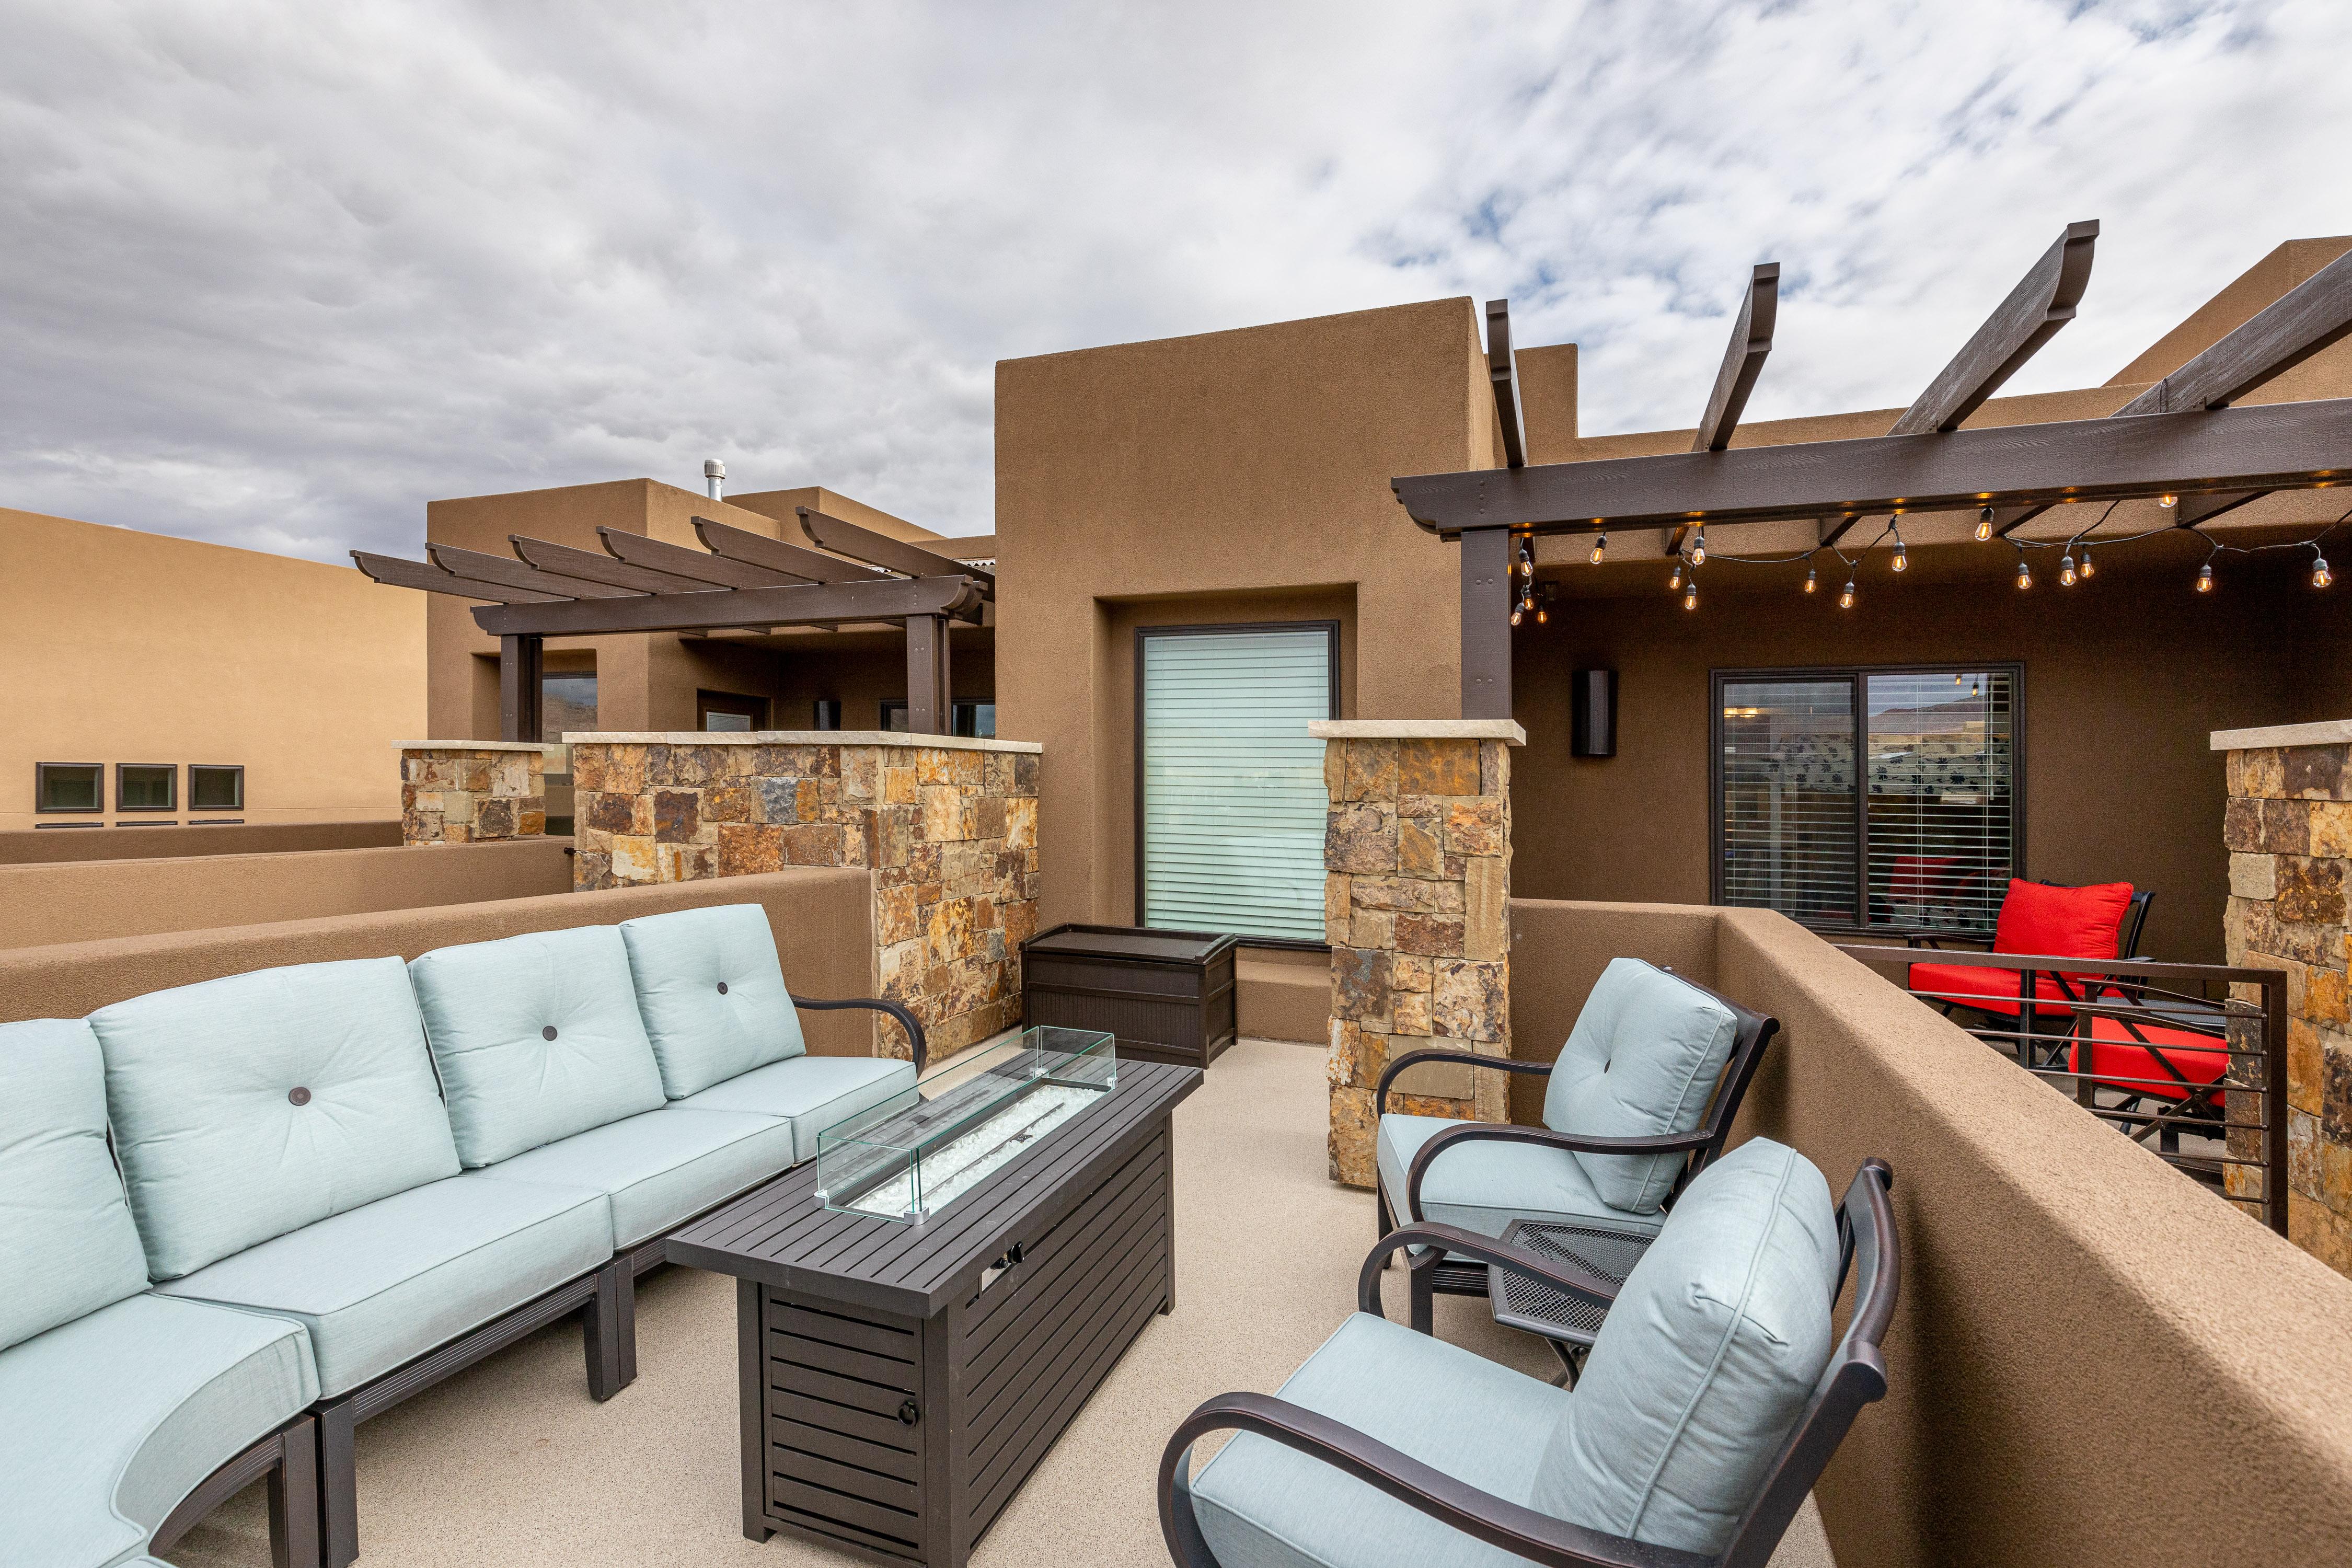 This deck is the perfect place to enjoy the weather of St. George!